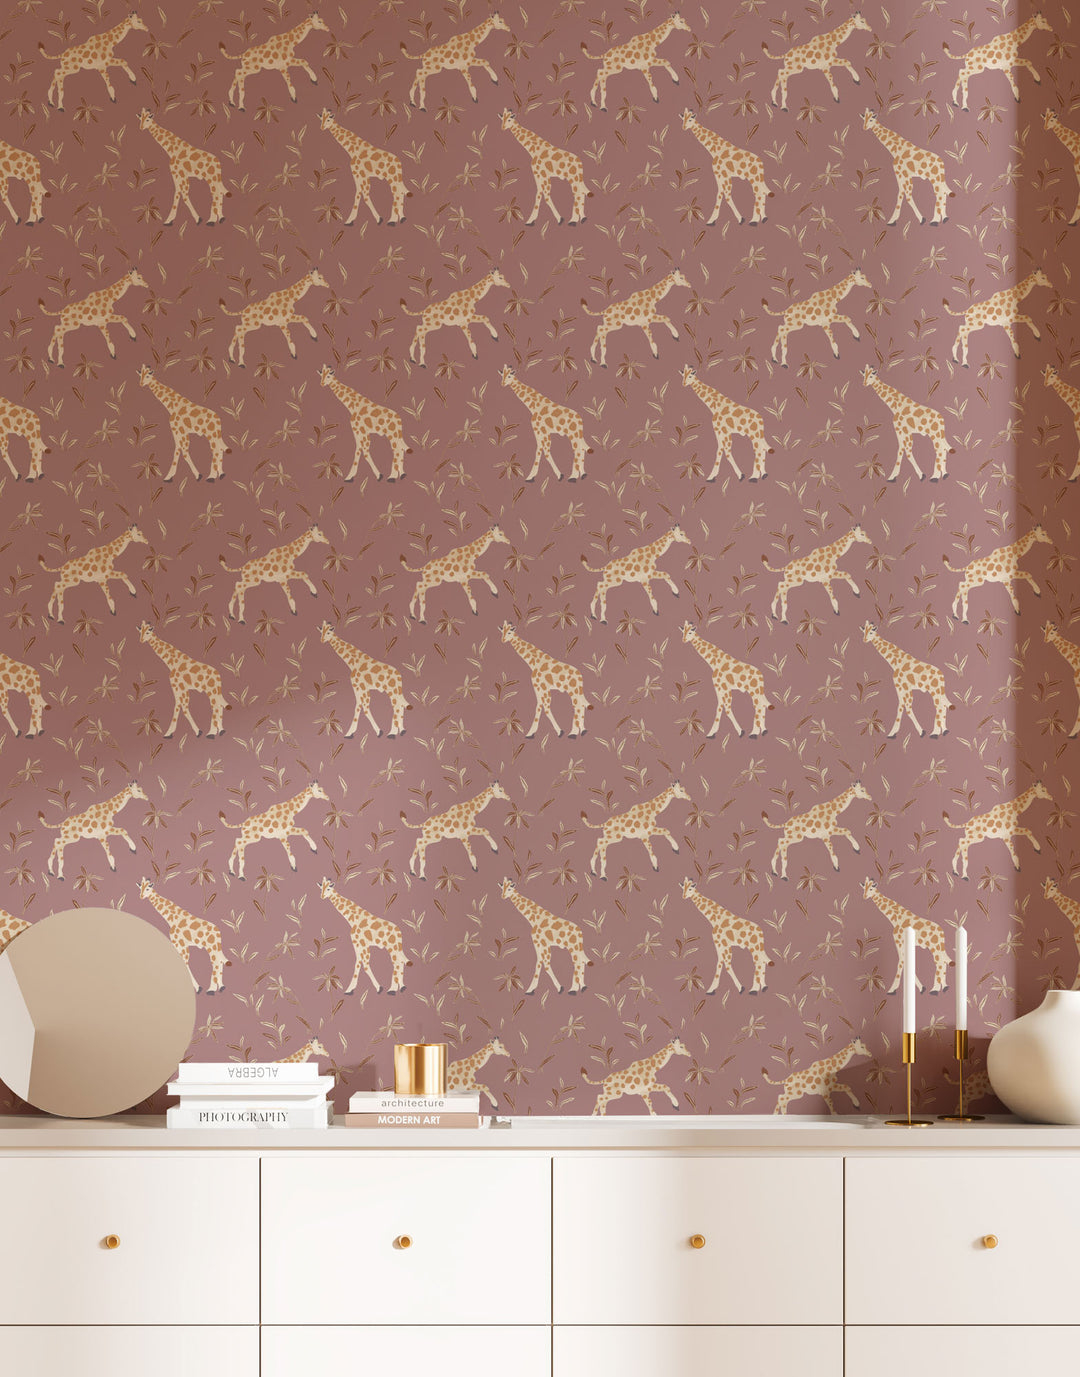 Gentle Giraffe - Mauve Cream Wallpaper by Blessed Little Bungalow